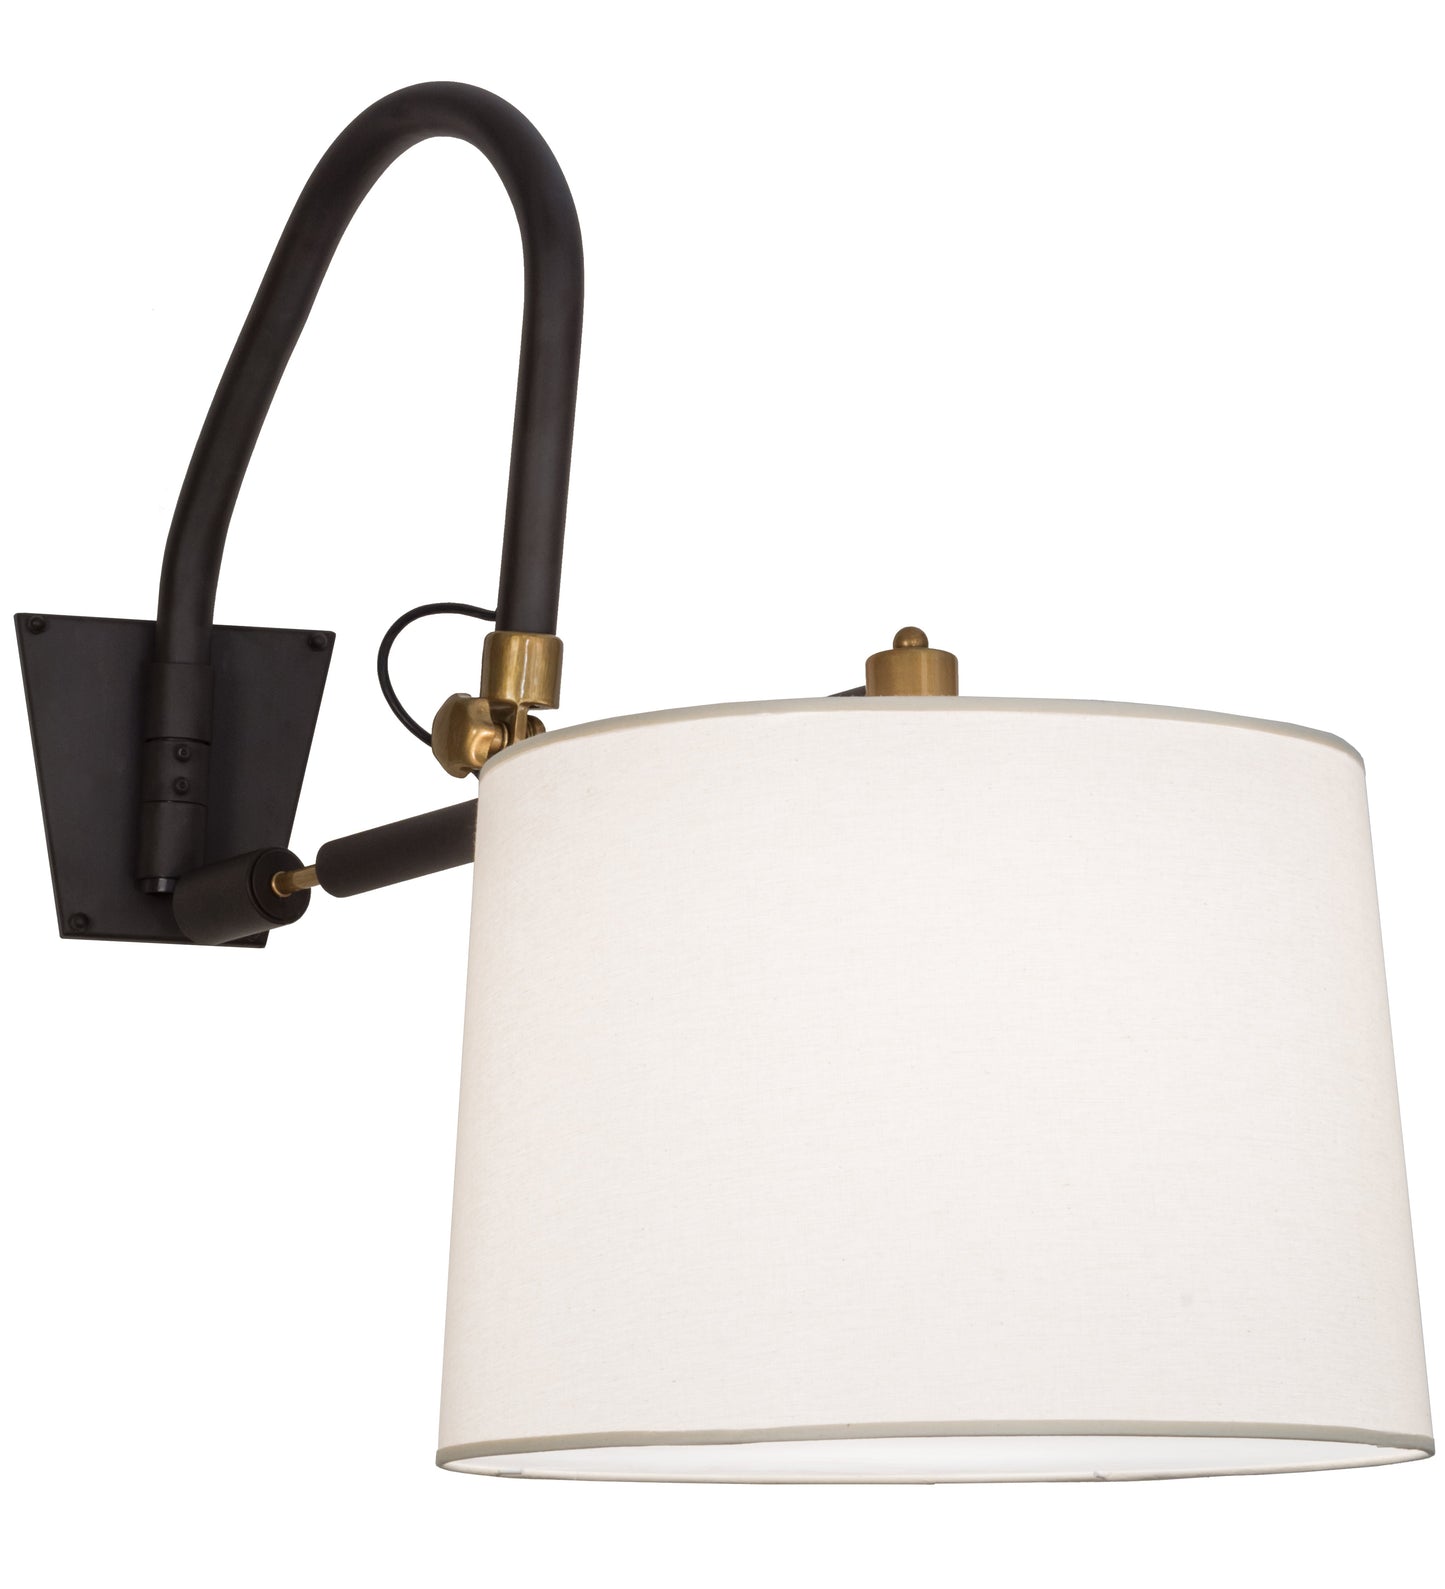 20" Stuyvesant Swing Arm Wall Sconce by 2nd Ave Lighting